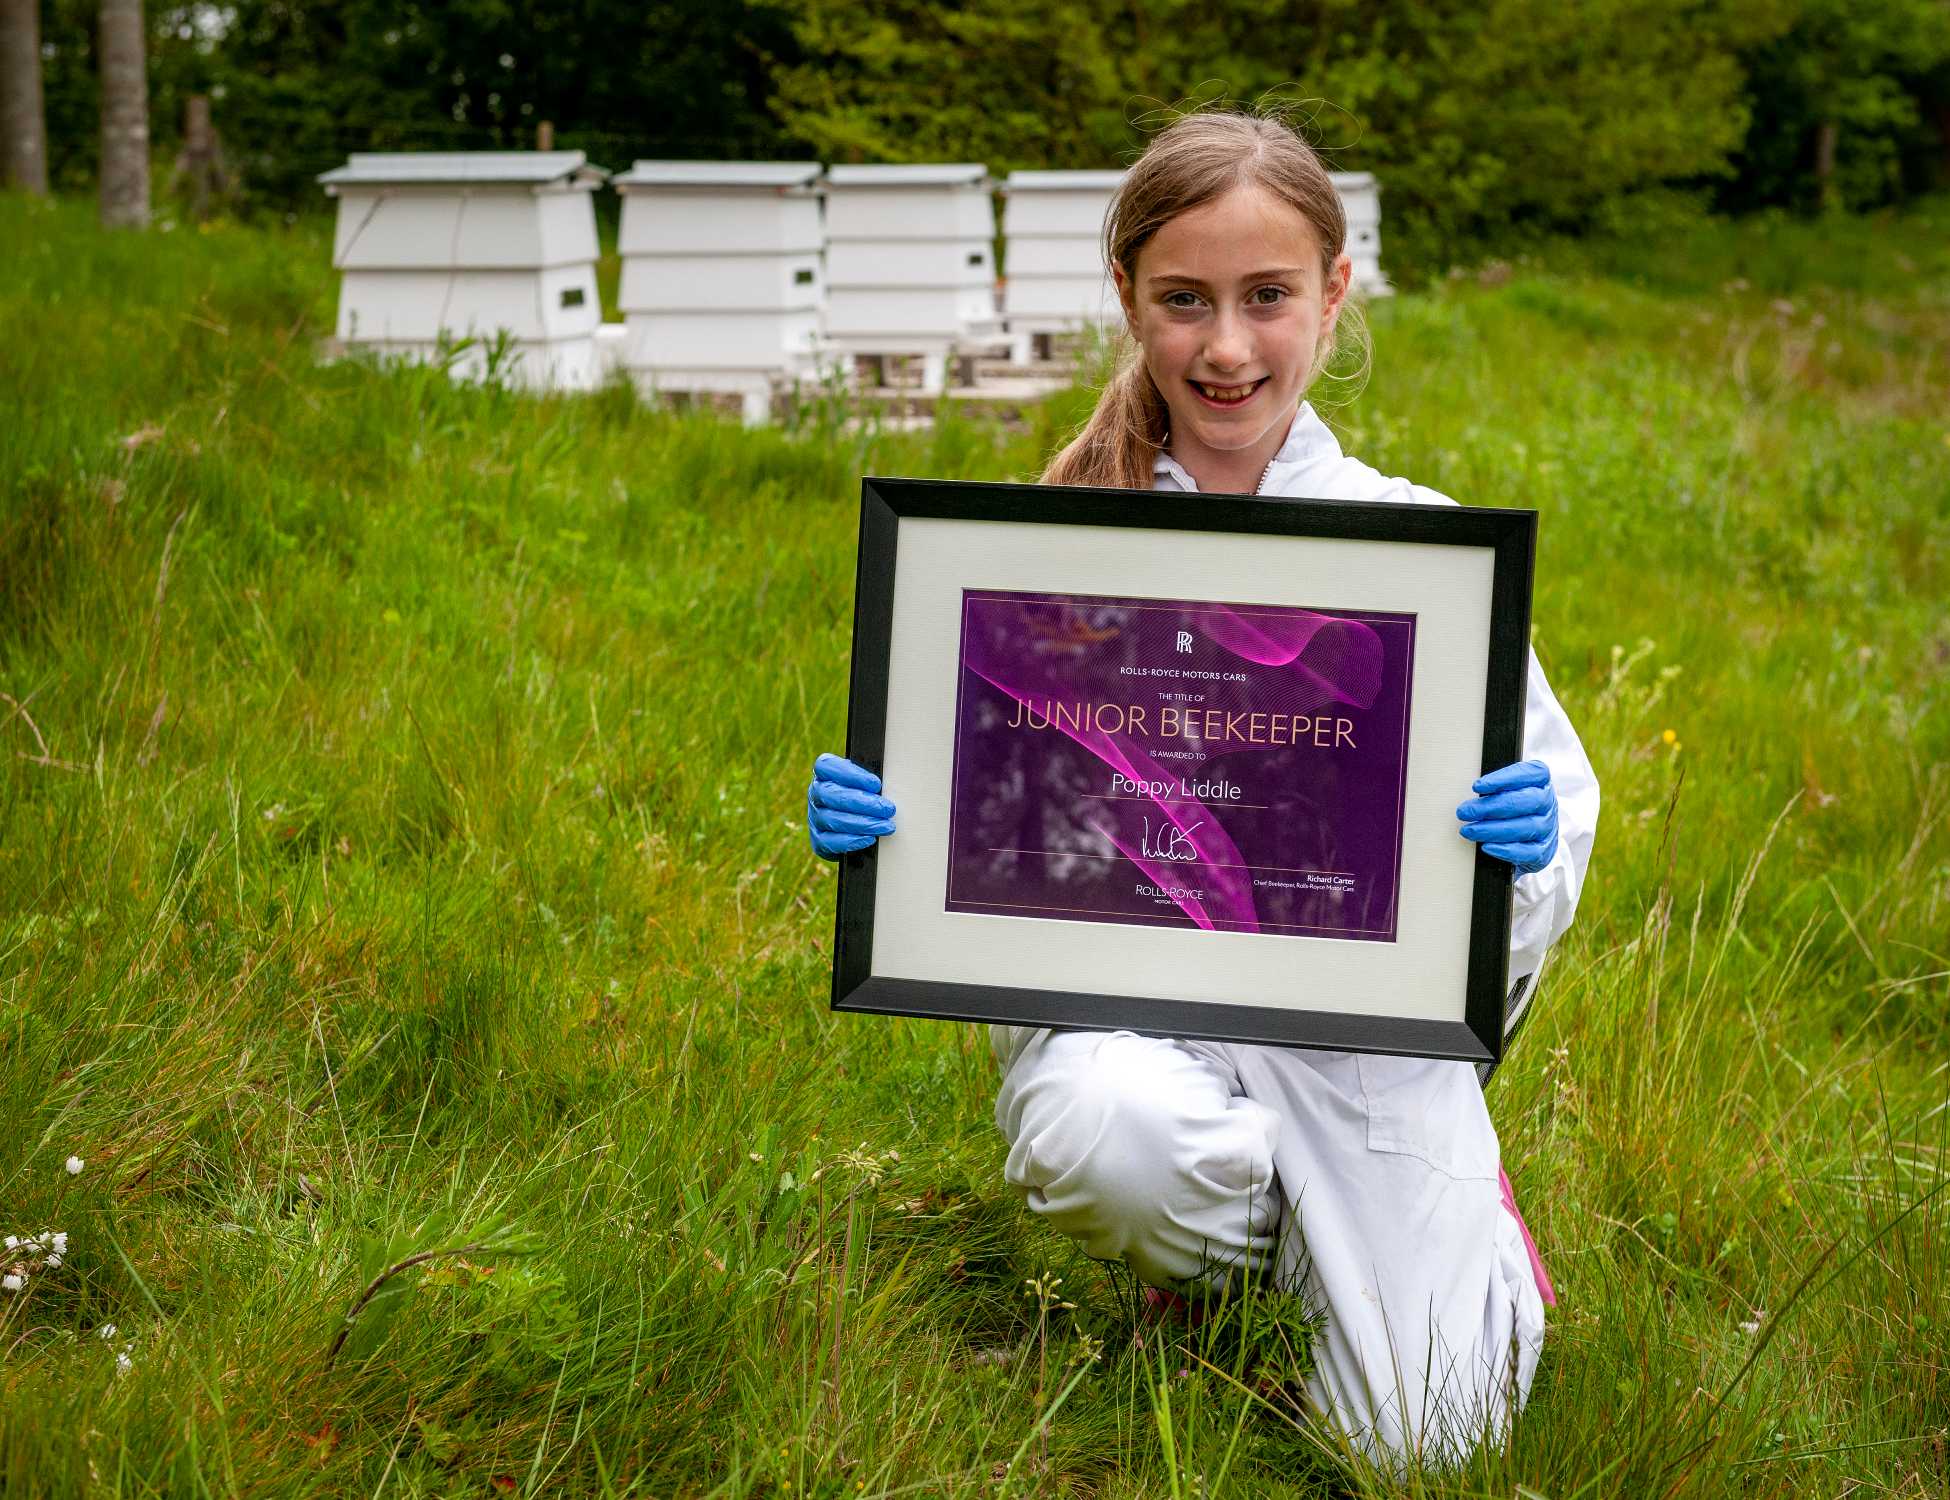 https://mediapool.bmwgroup.com/cache/P9/202105/P90422831/P90422831-rolls-royce-appoints-poppy-liddle-as-first-ever-junior-beekeeper-1950px.jpg